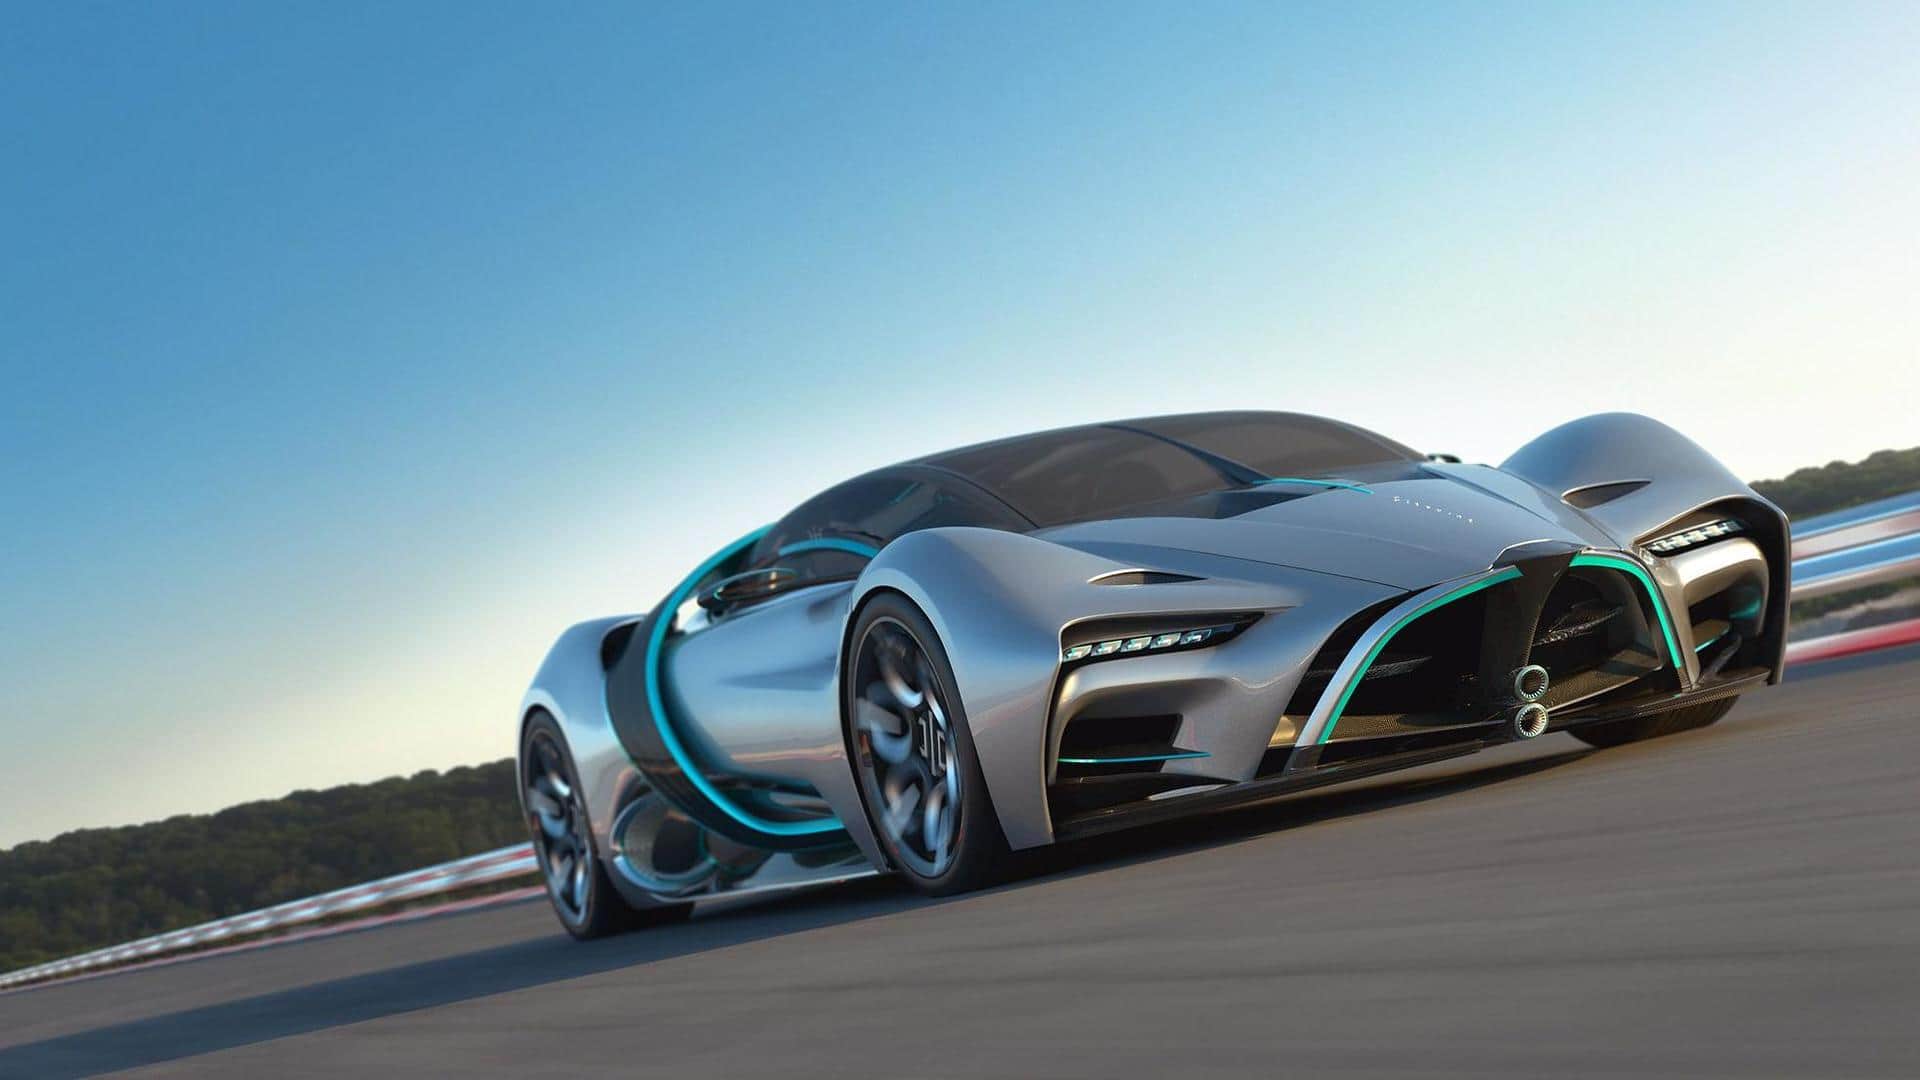 Hyperion XP-1 hydrogen-powered hypercar makes public debut: Check features